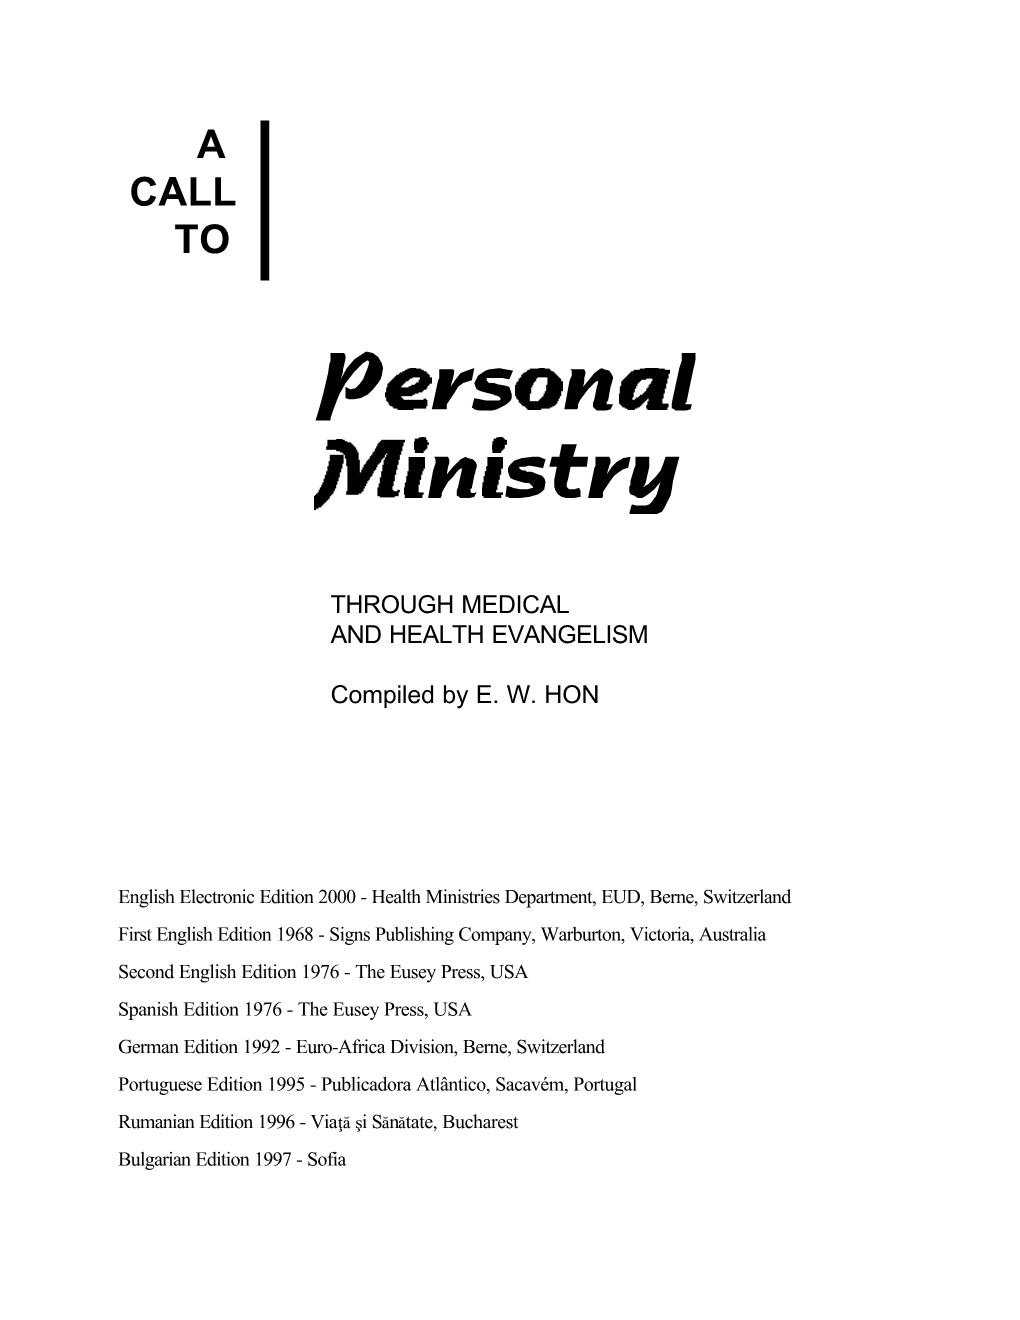 A Call to Personal Ministry Is out of Print for Over 25 Years